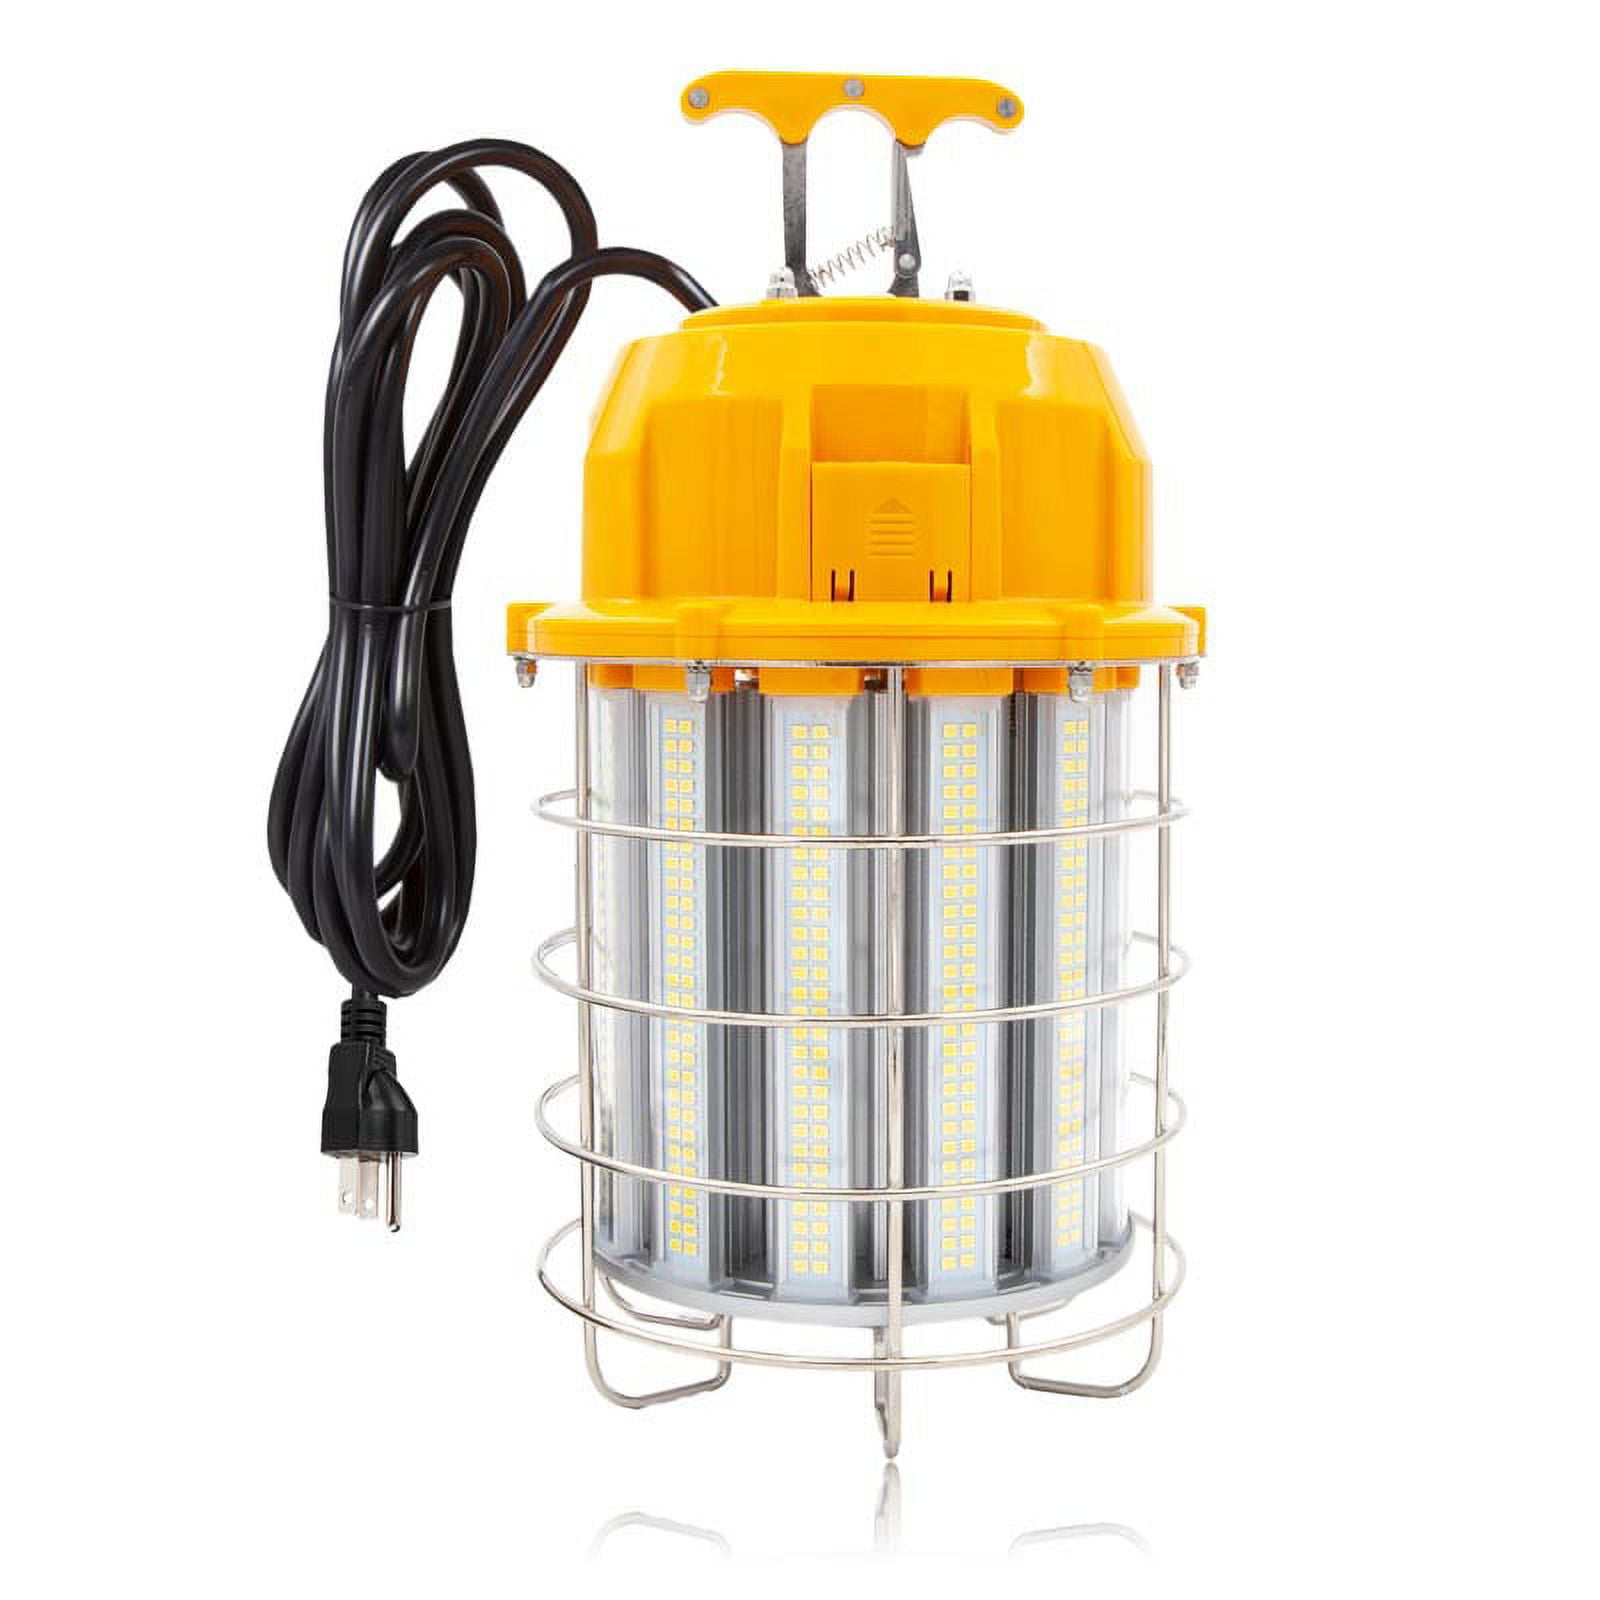 Maxxima High Bay LED Temporary Work Light Fixture 150 Watt 1800 Lumens, Daylight  5000K, IP65, Linkable, Stainless Steel Cage Guard, Easy Latch to Mount,  Plug in with Surge Protection